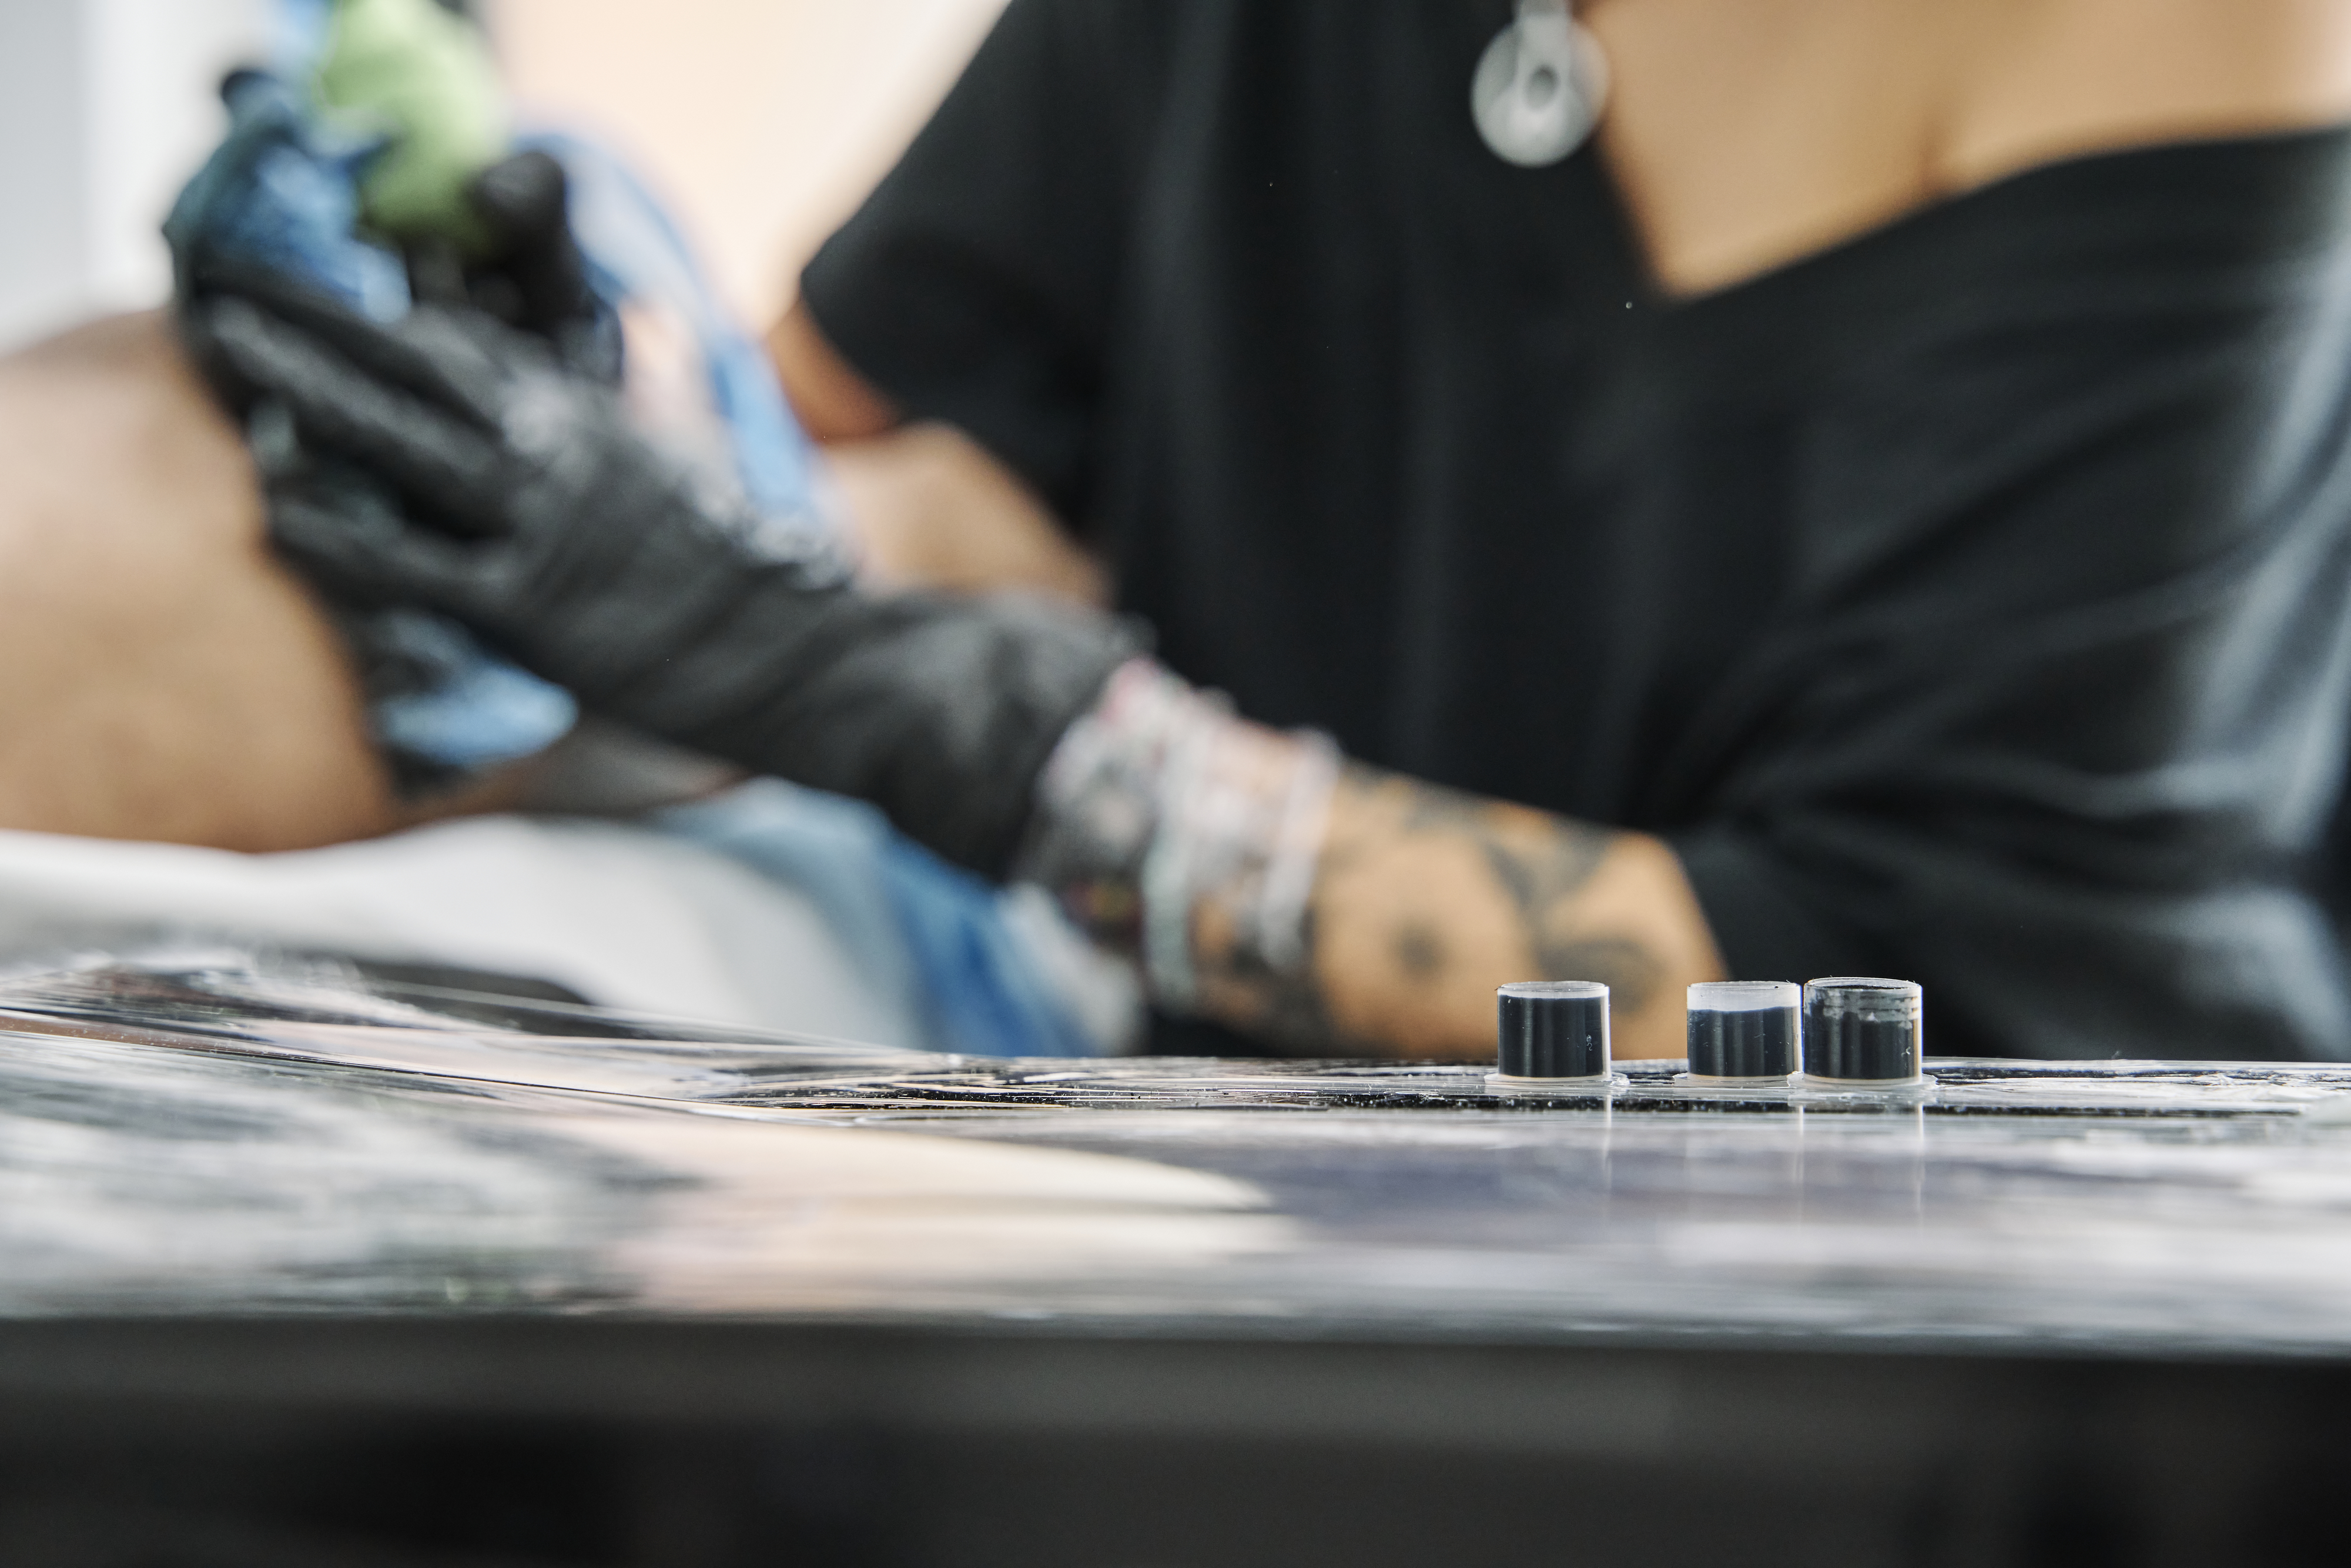 tattoo artist working on client with black ink on table